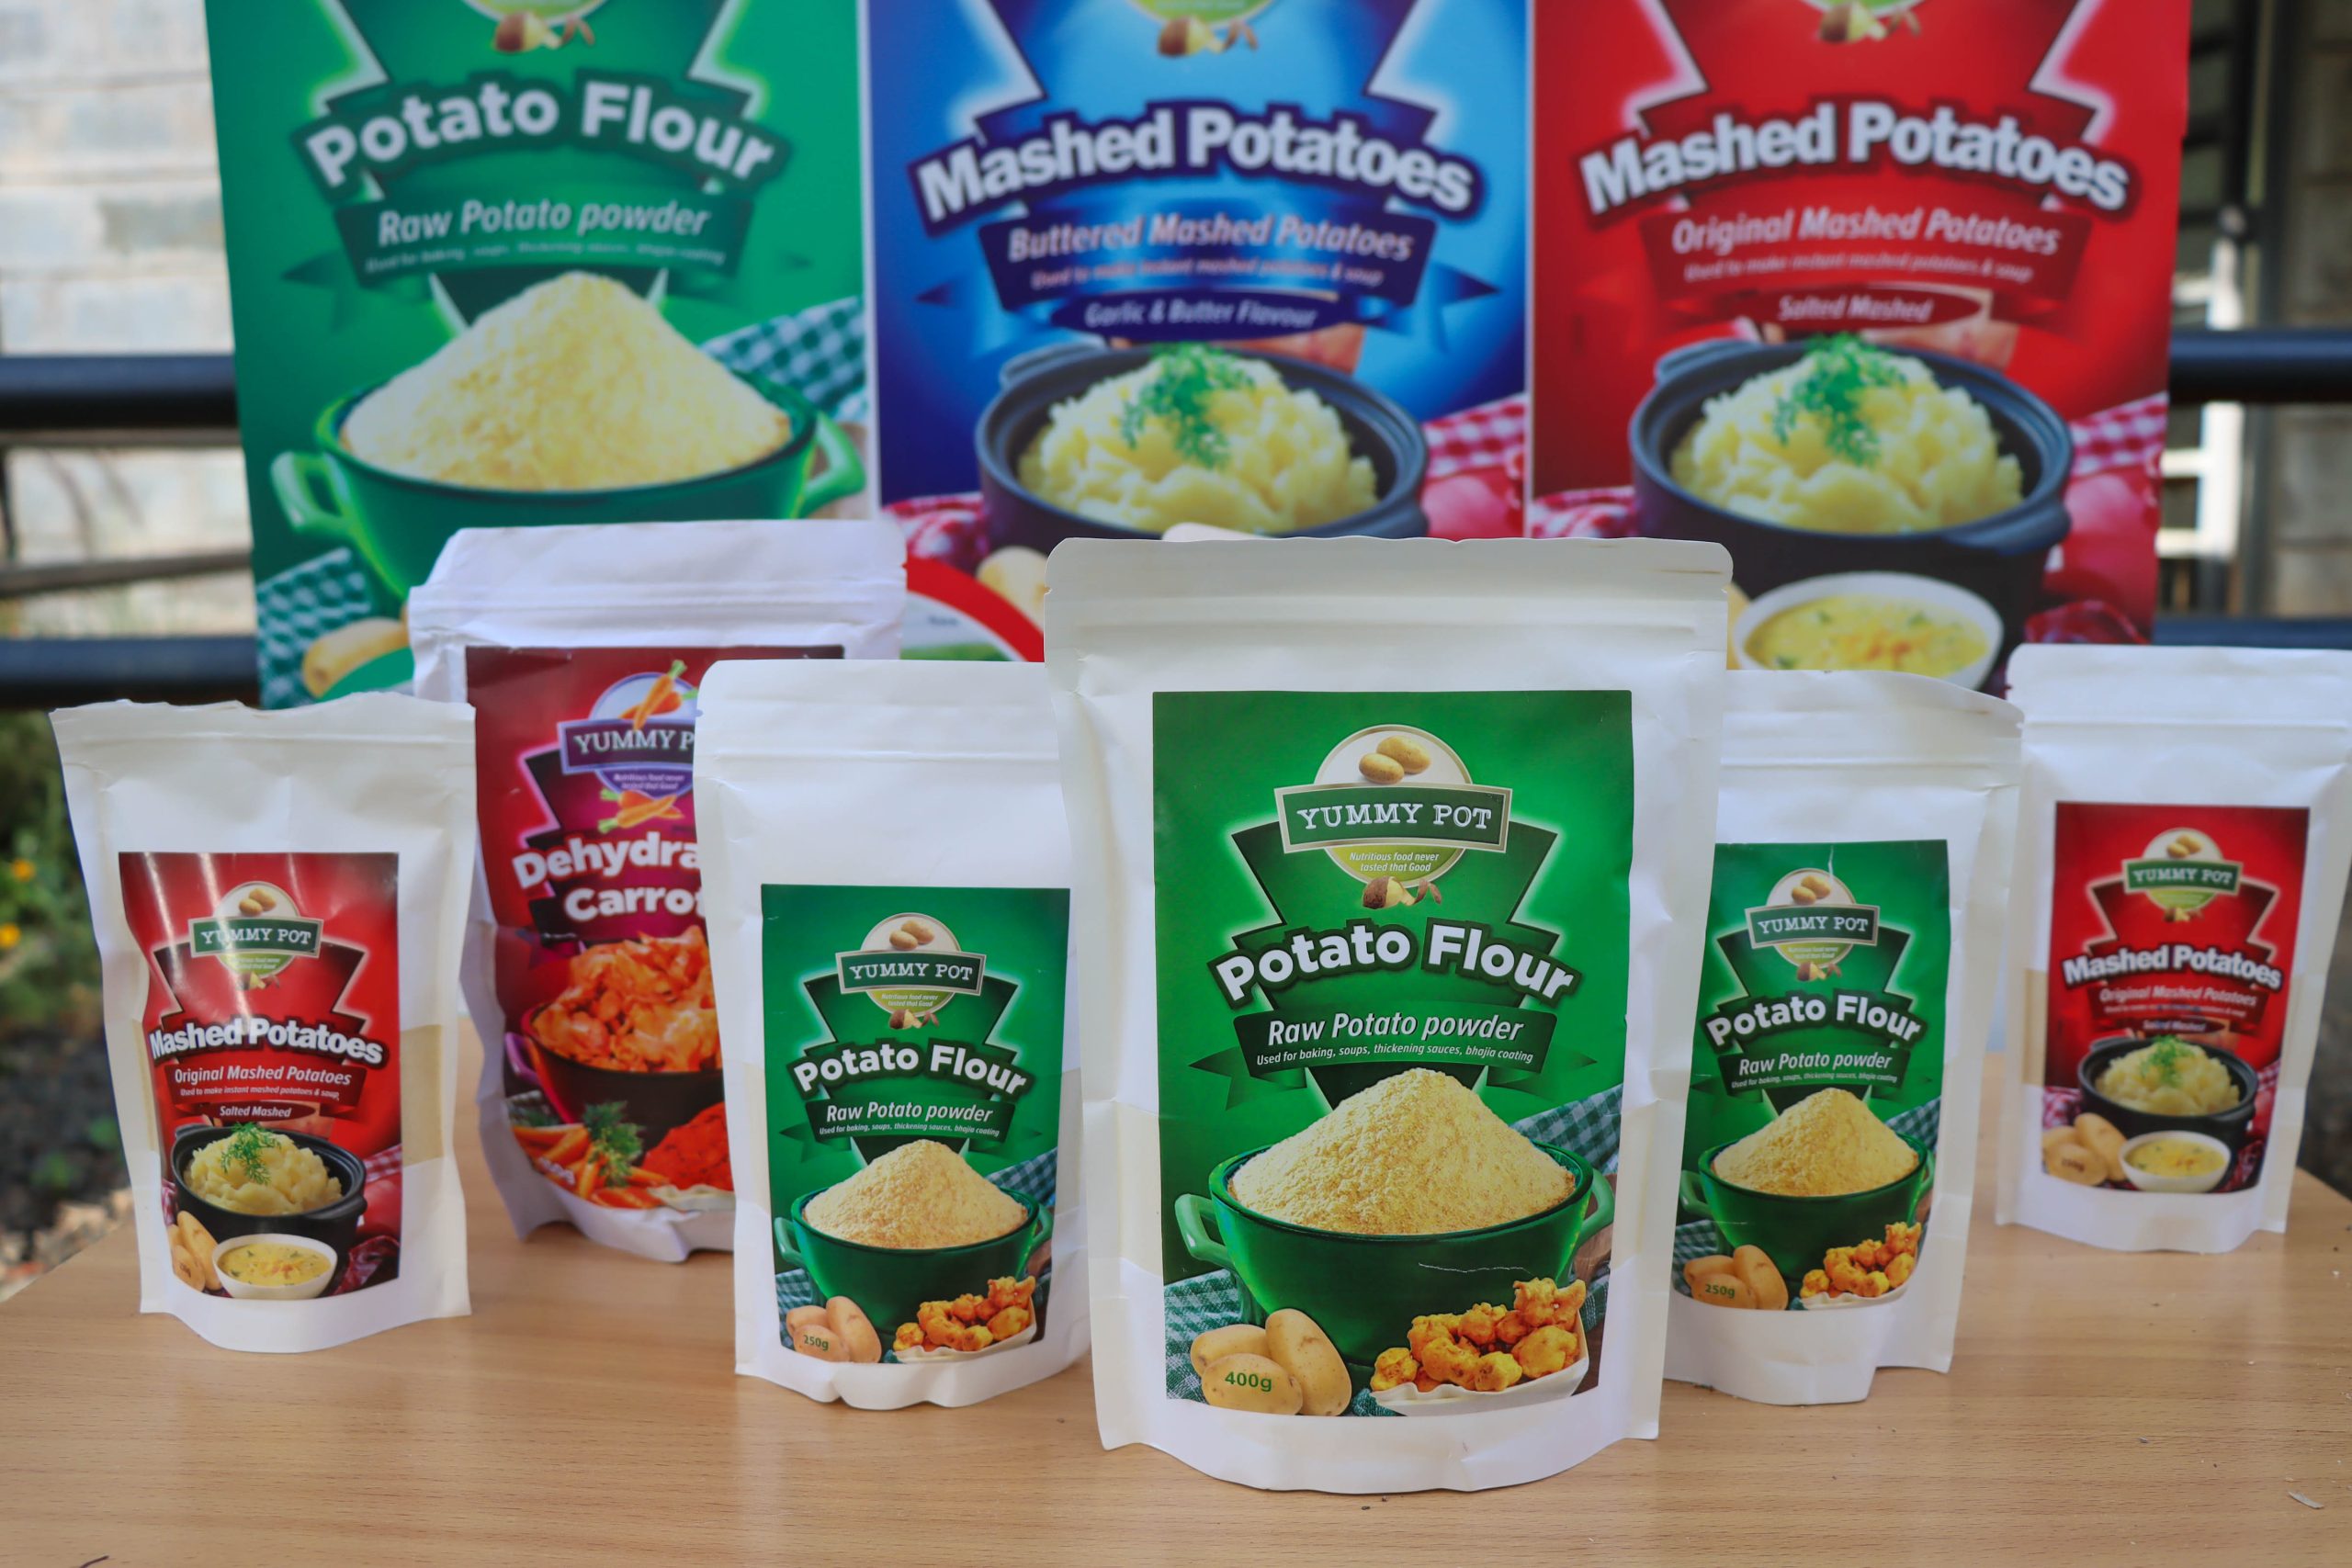 Value addition company changing the potato industry in Kenya.